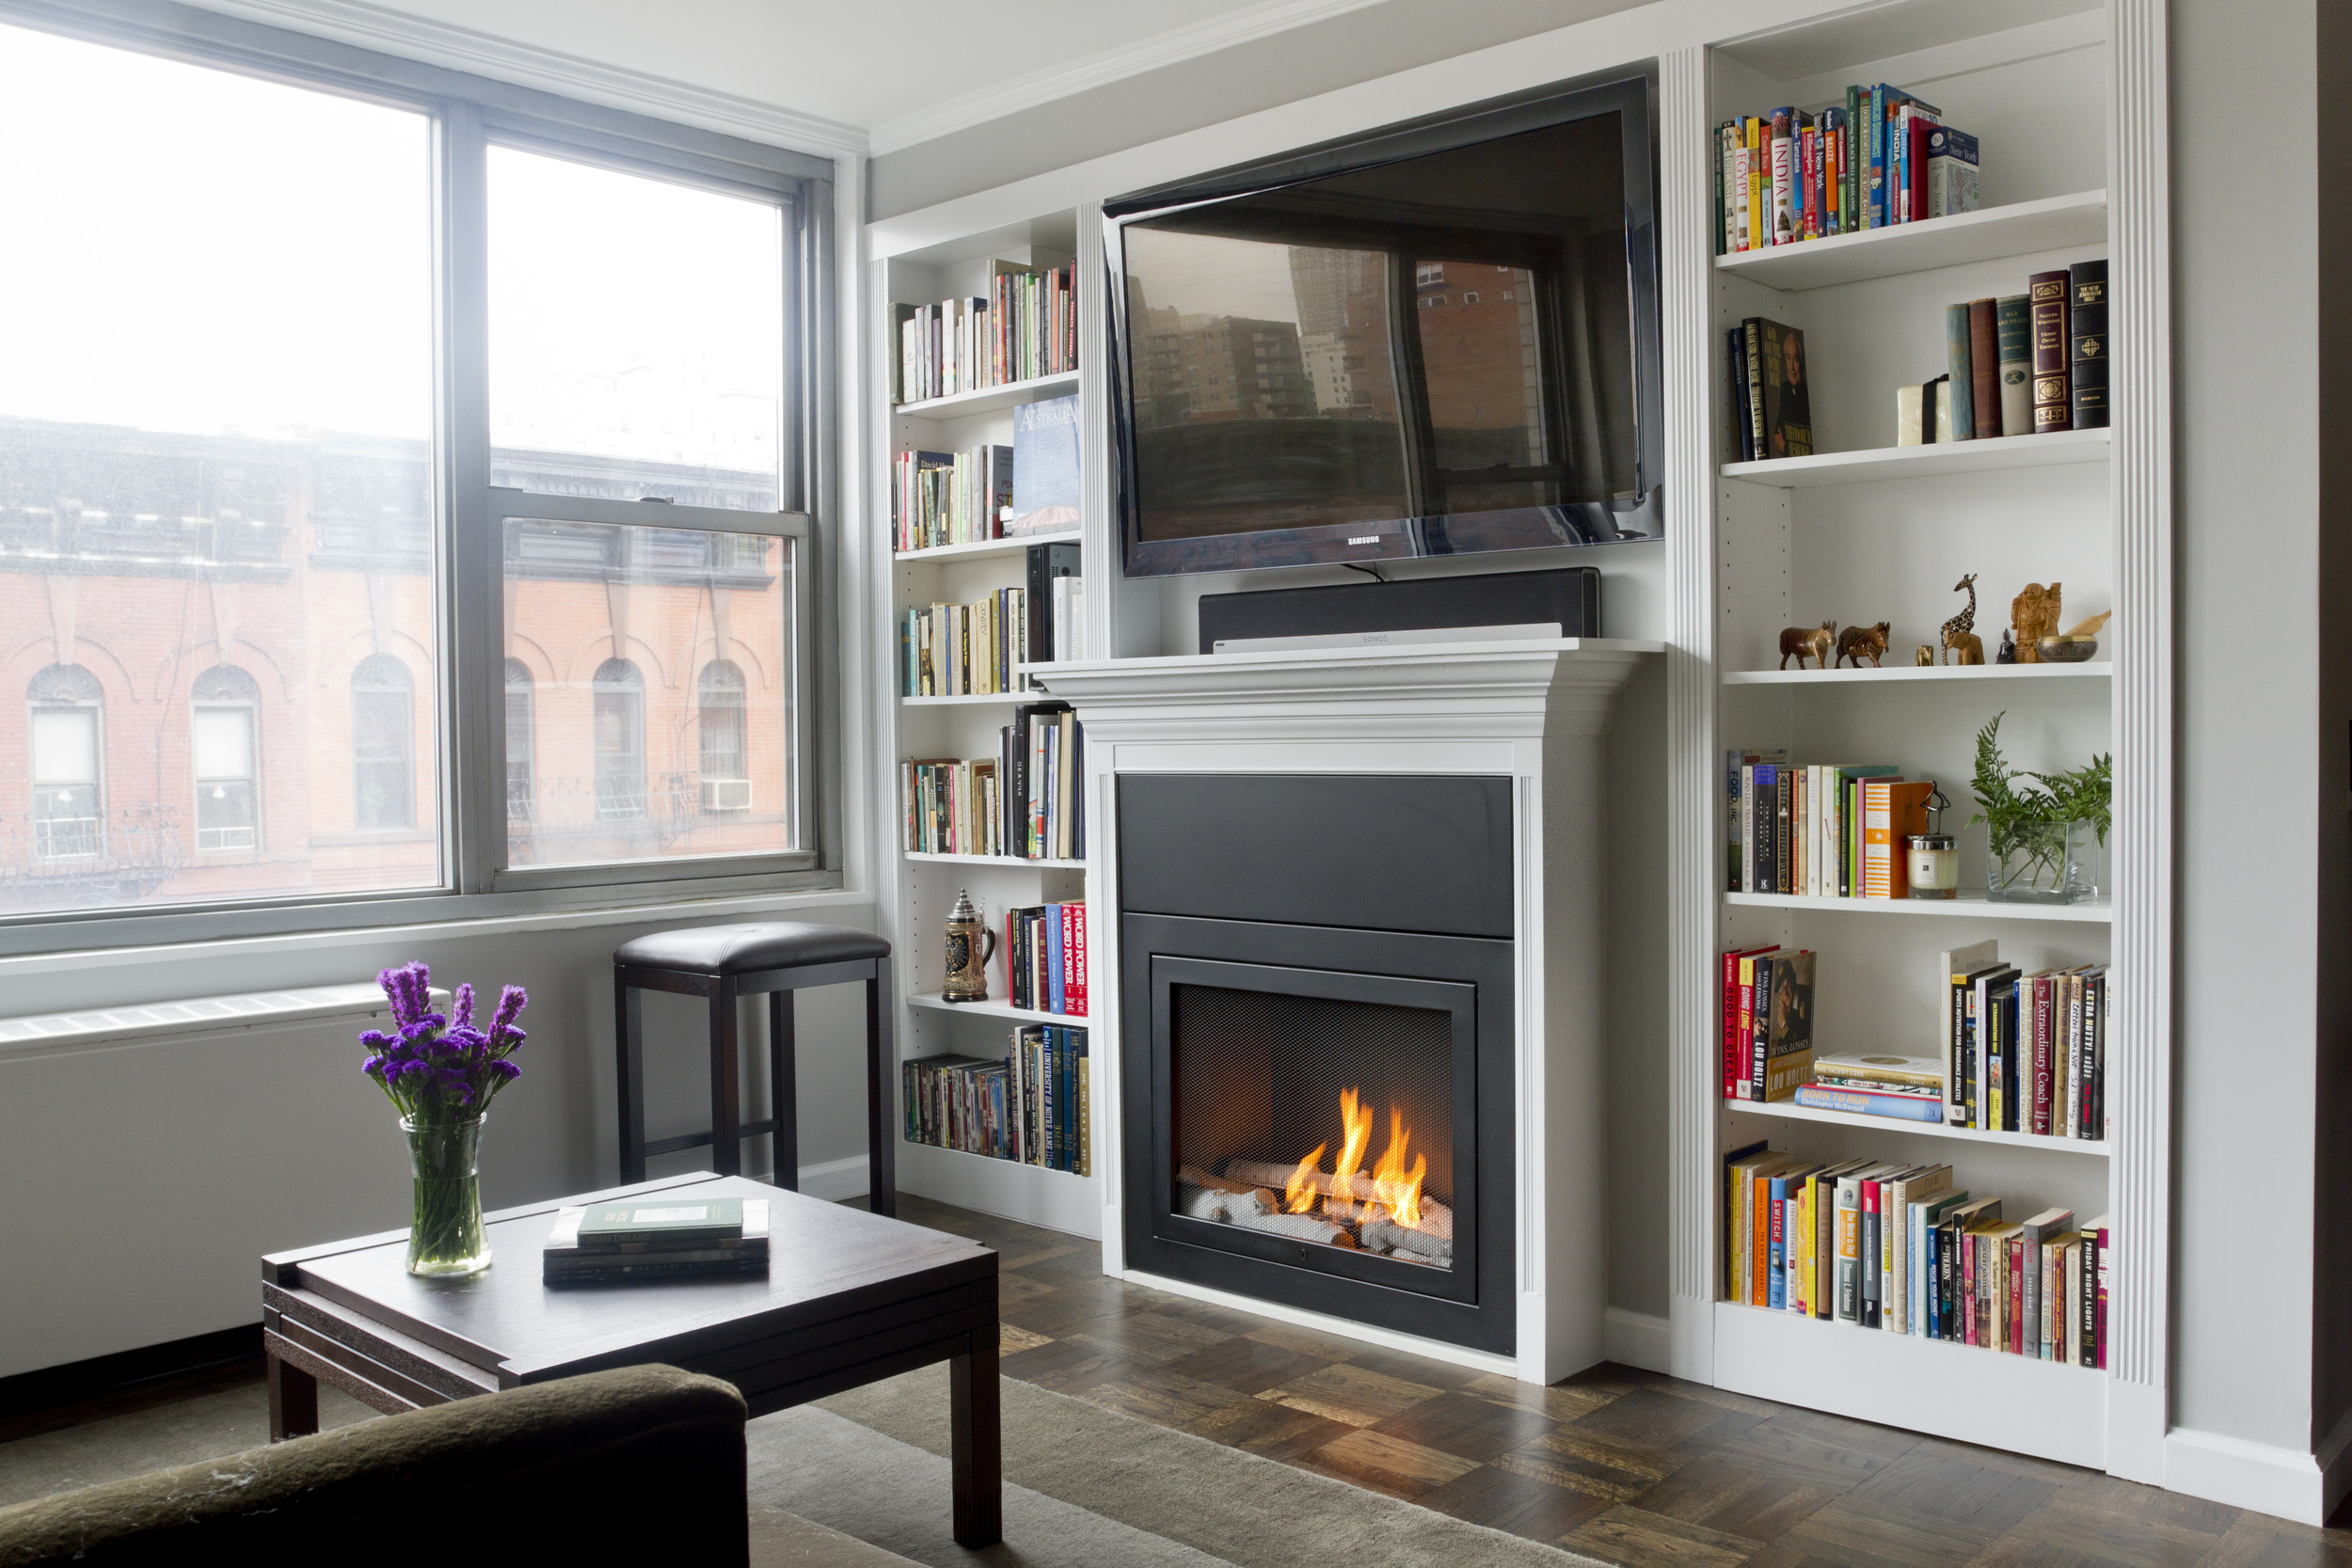 Comparing Types Of Fireplaces